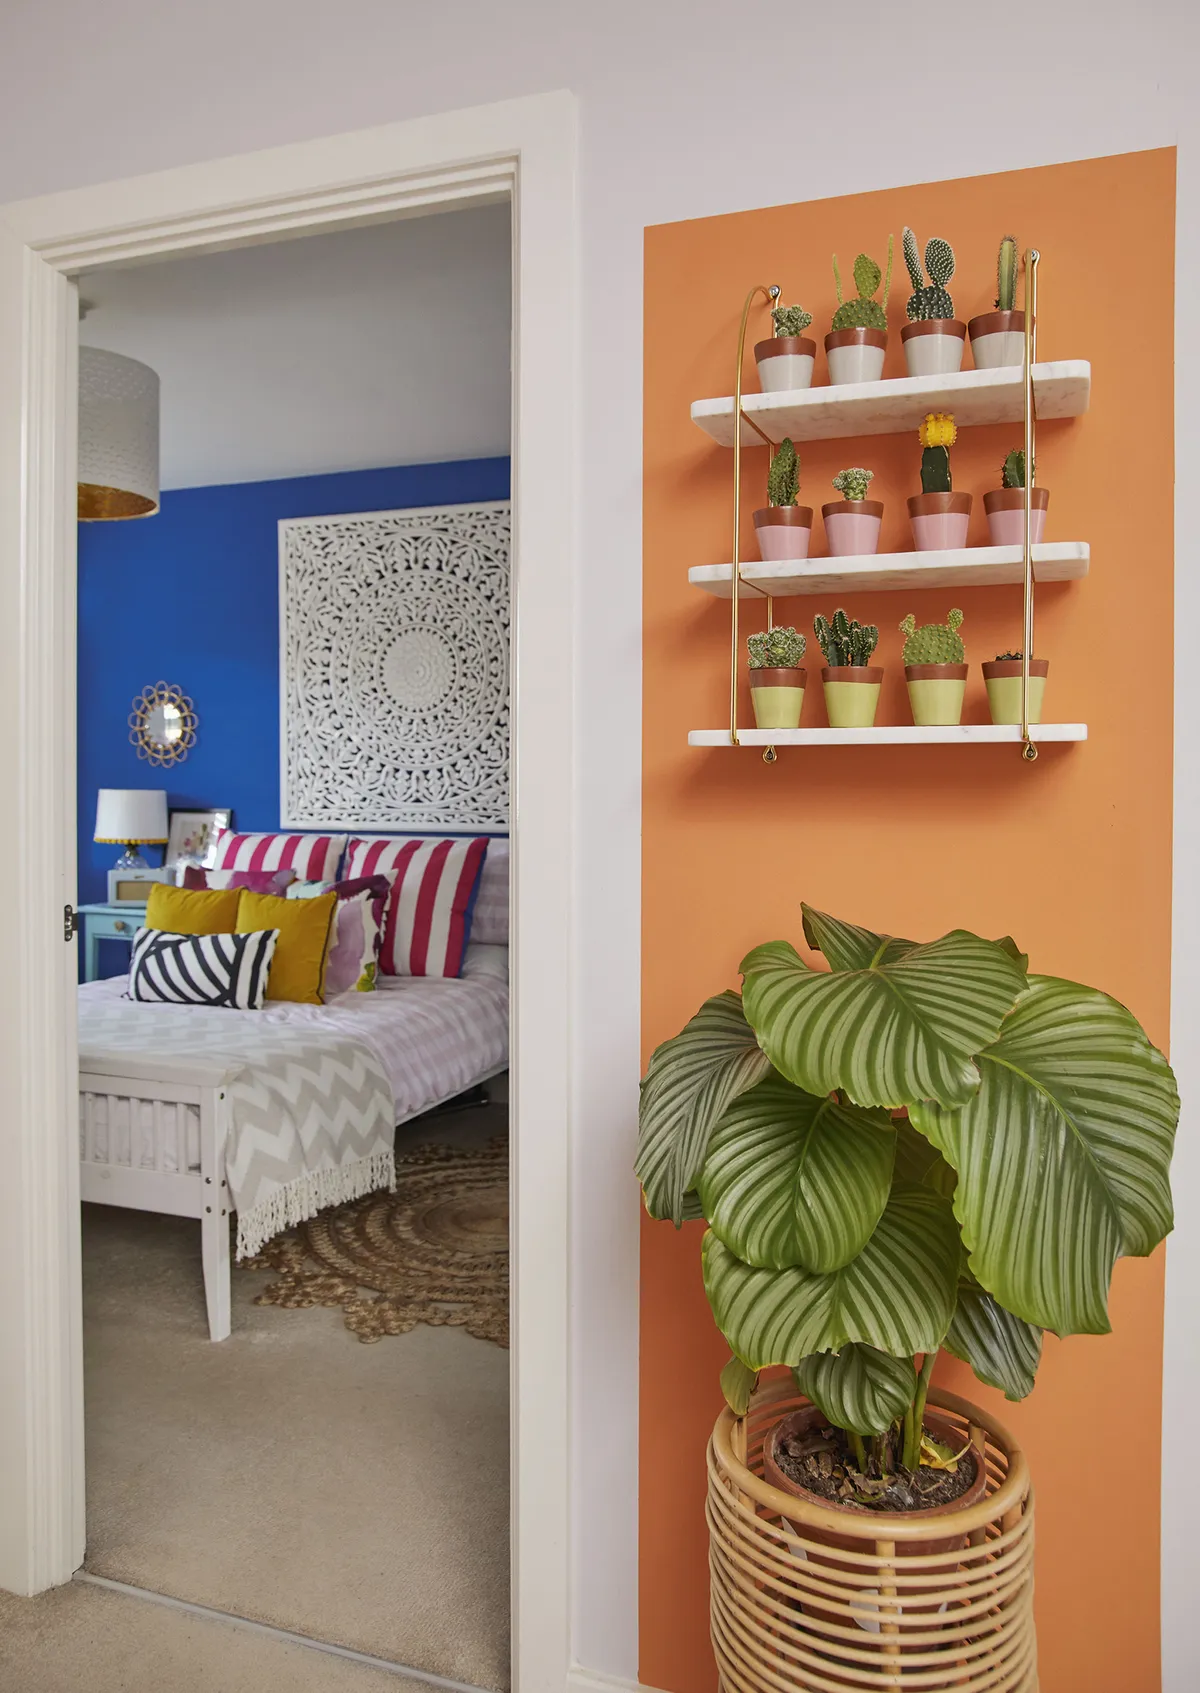 ‘The landing is really dark, so adding this colour block of orange brightens up the space and I love the clash with the blue. The shelves are from La Redoute and the cacti and plants are from a local garden centre – they were so cute that I just went mad and bought them all’